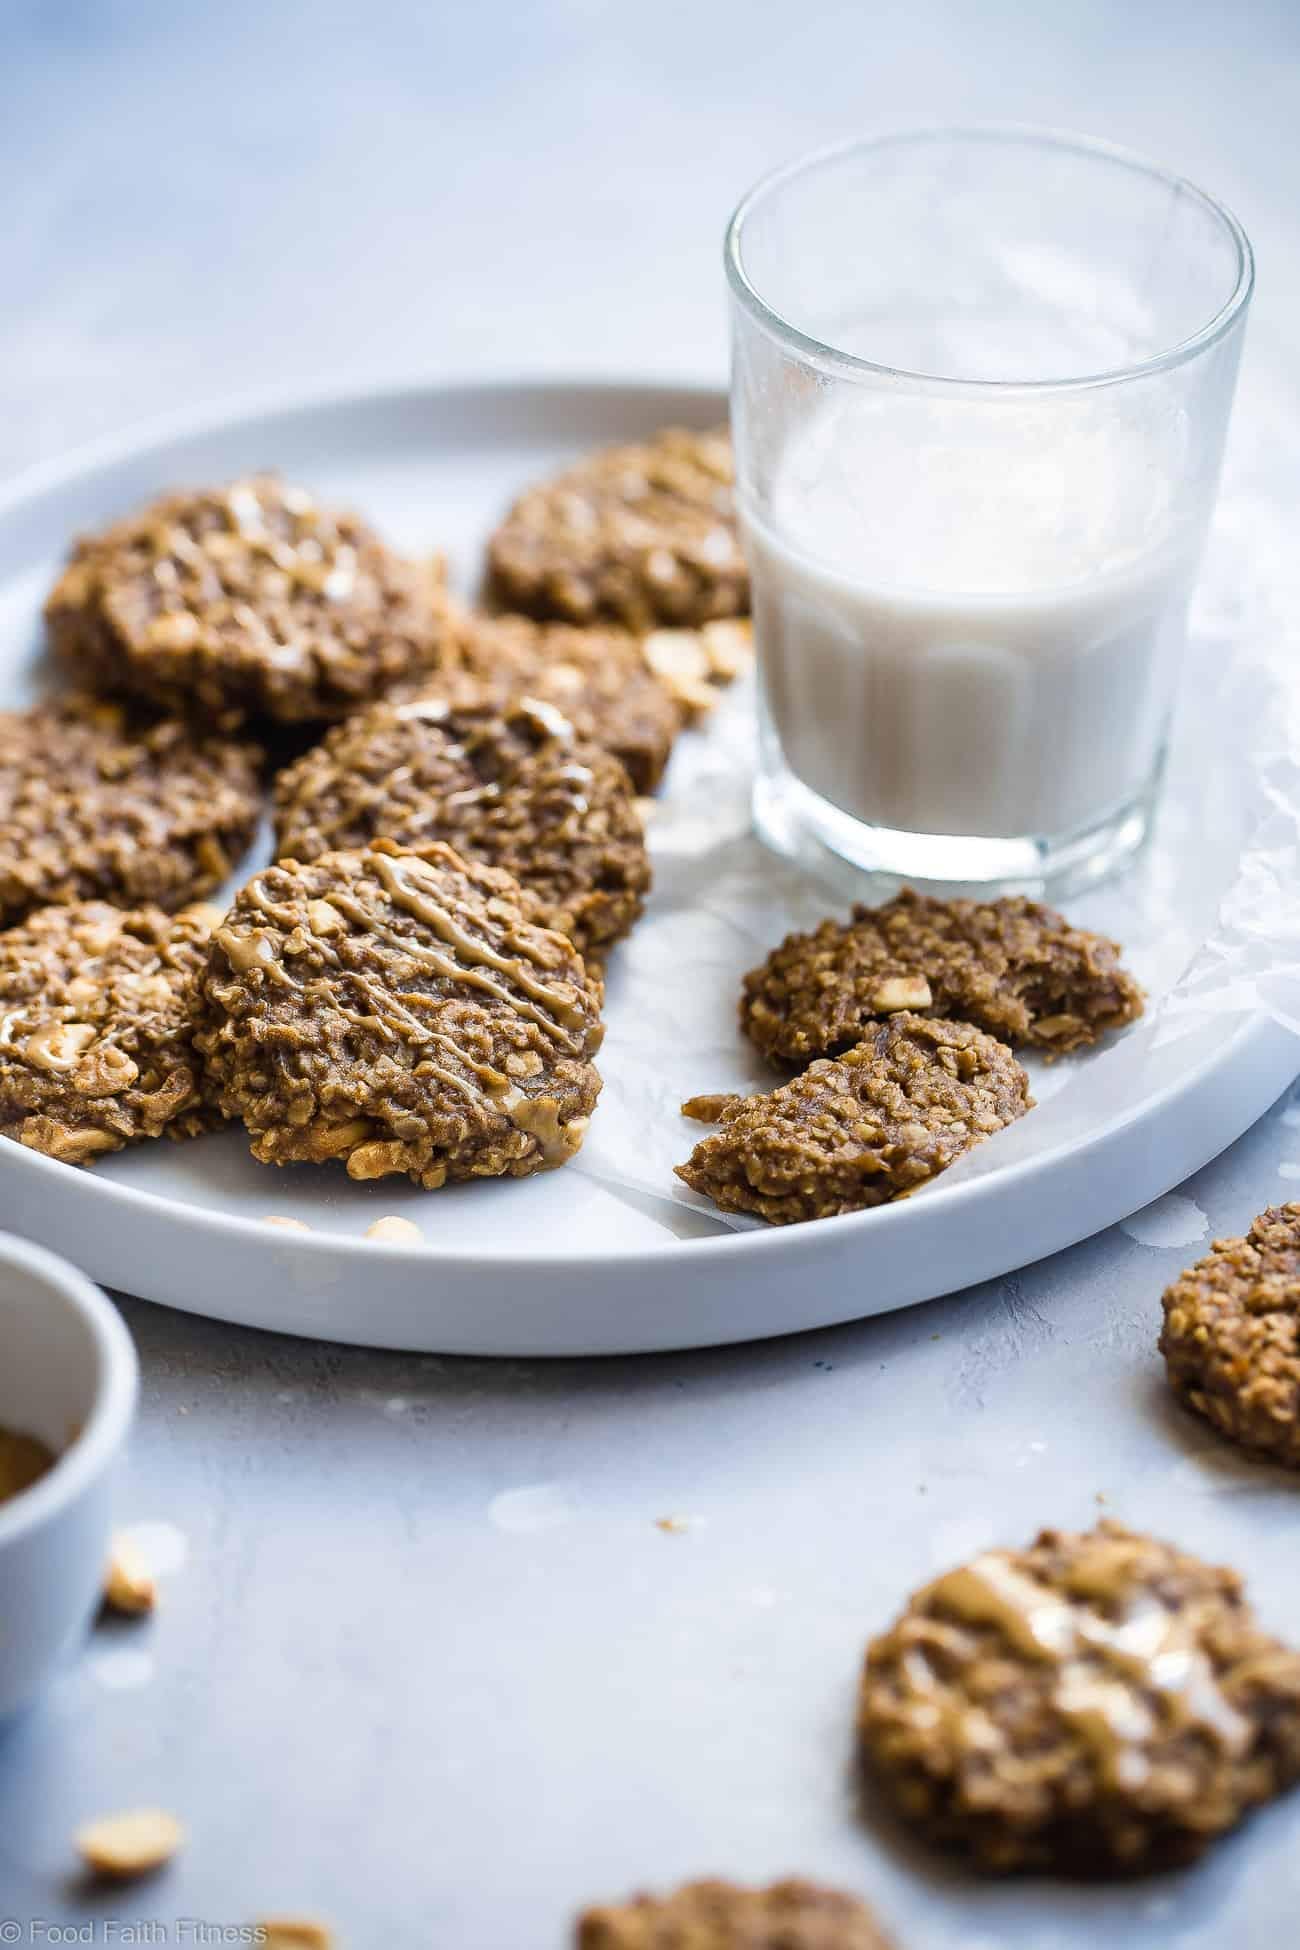 Easy Peanut Butter Oatmeal Banana Cookies - These recipe for banana cookies use only 5 simple ingredients and are dairy free and vegan friendly! A healthy treat for kids and adults that can be a breakfast or snack! | Foodfaithfitness.com | @FoodFaithFit